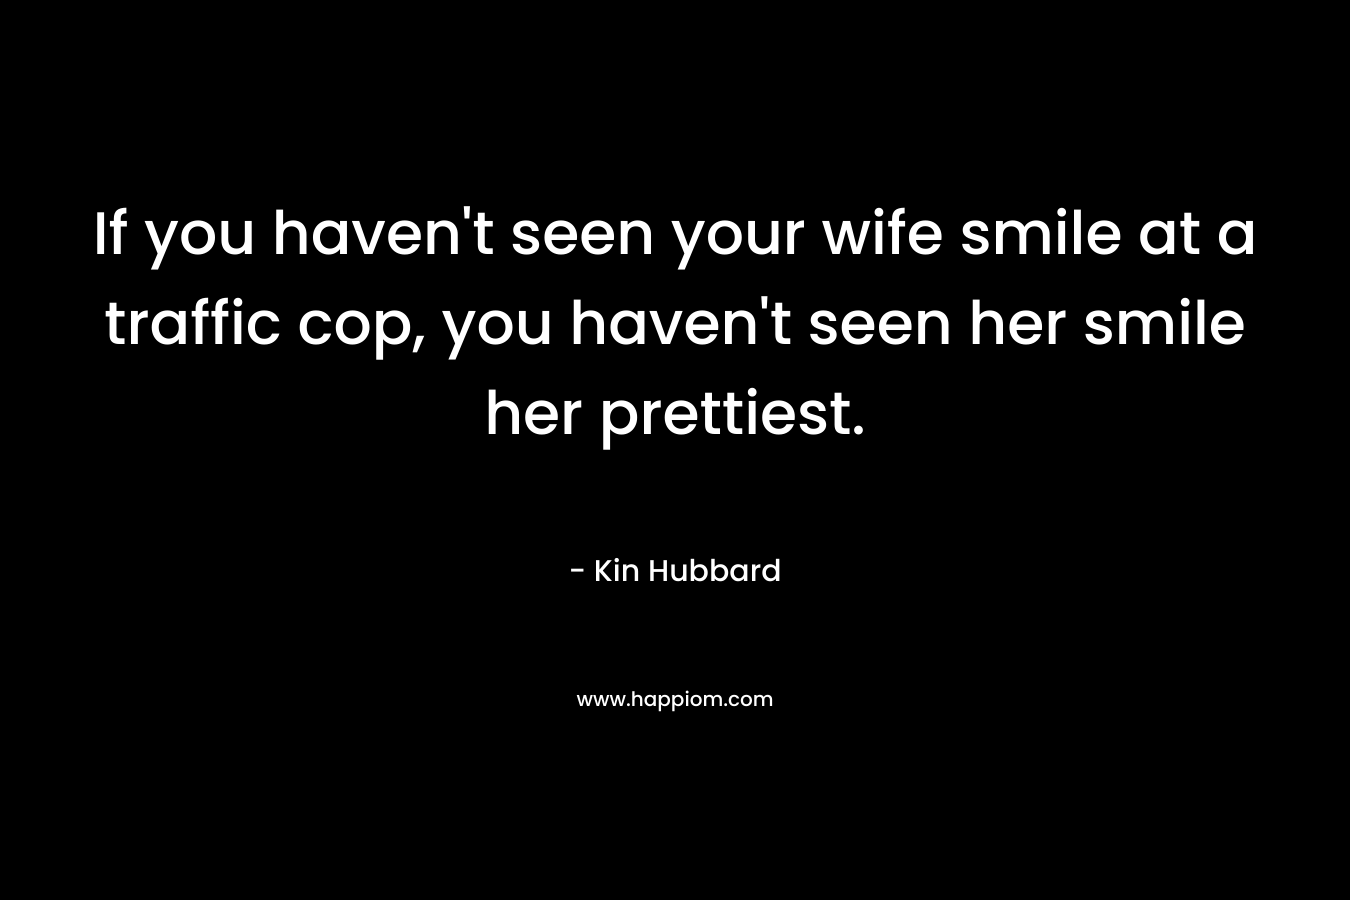 If you haven't seen your wife smile at a traffic cop, you haven't seen her smile her prettiest.